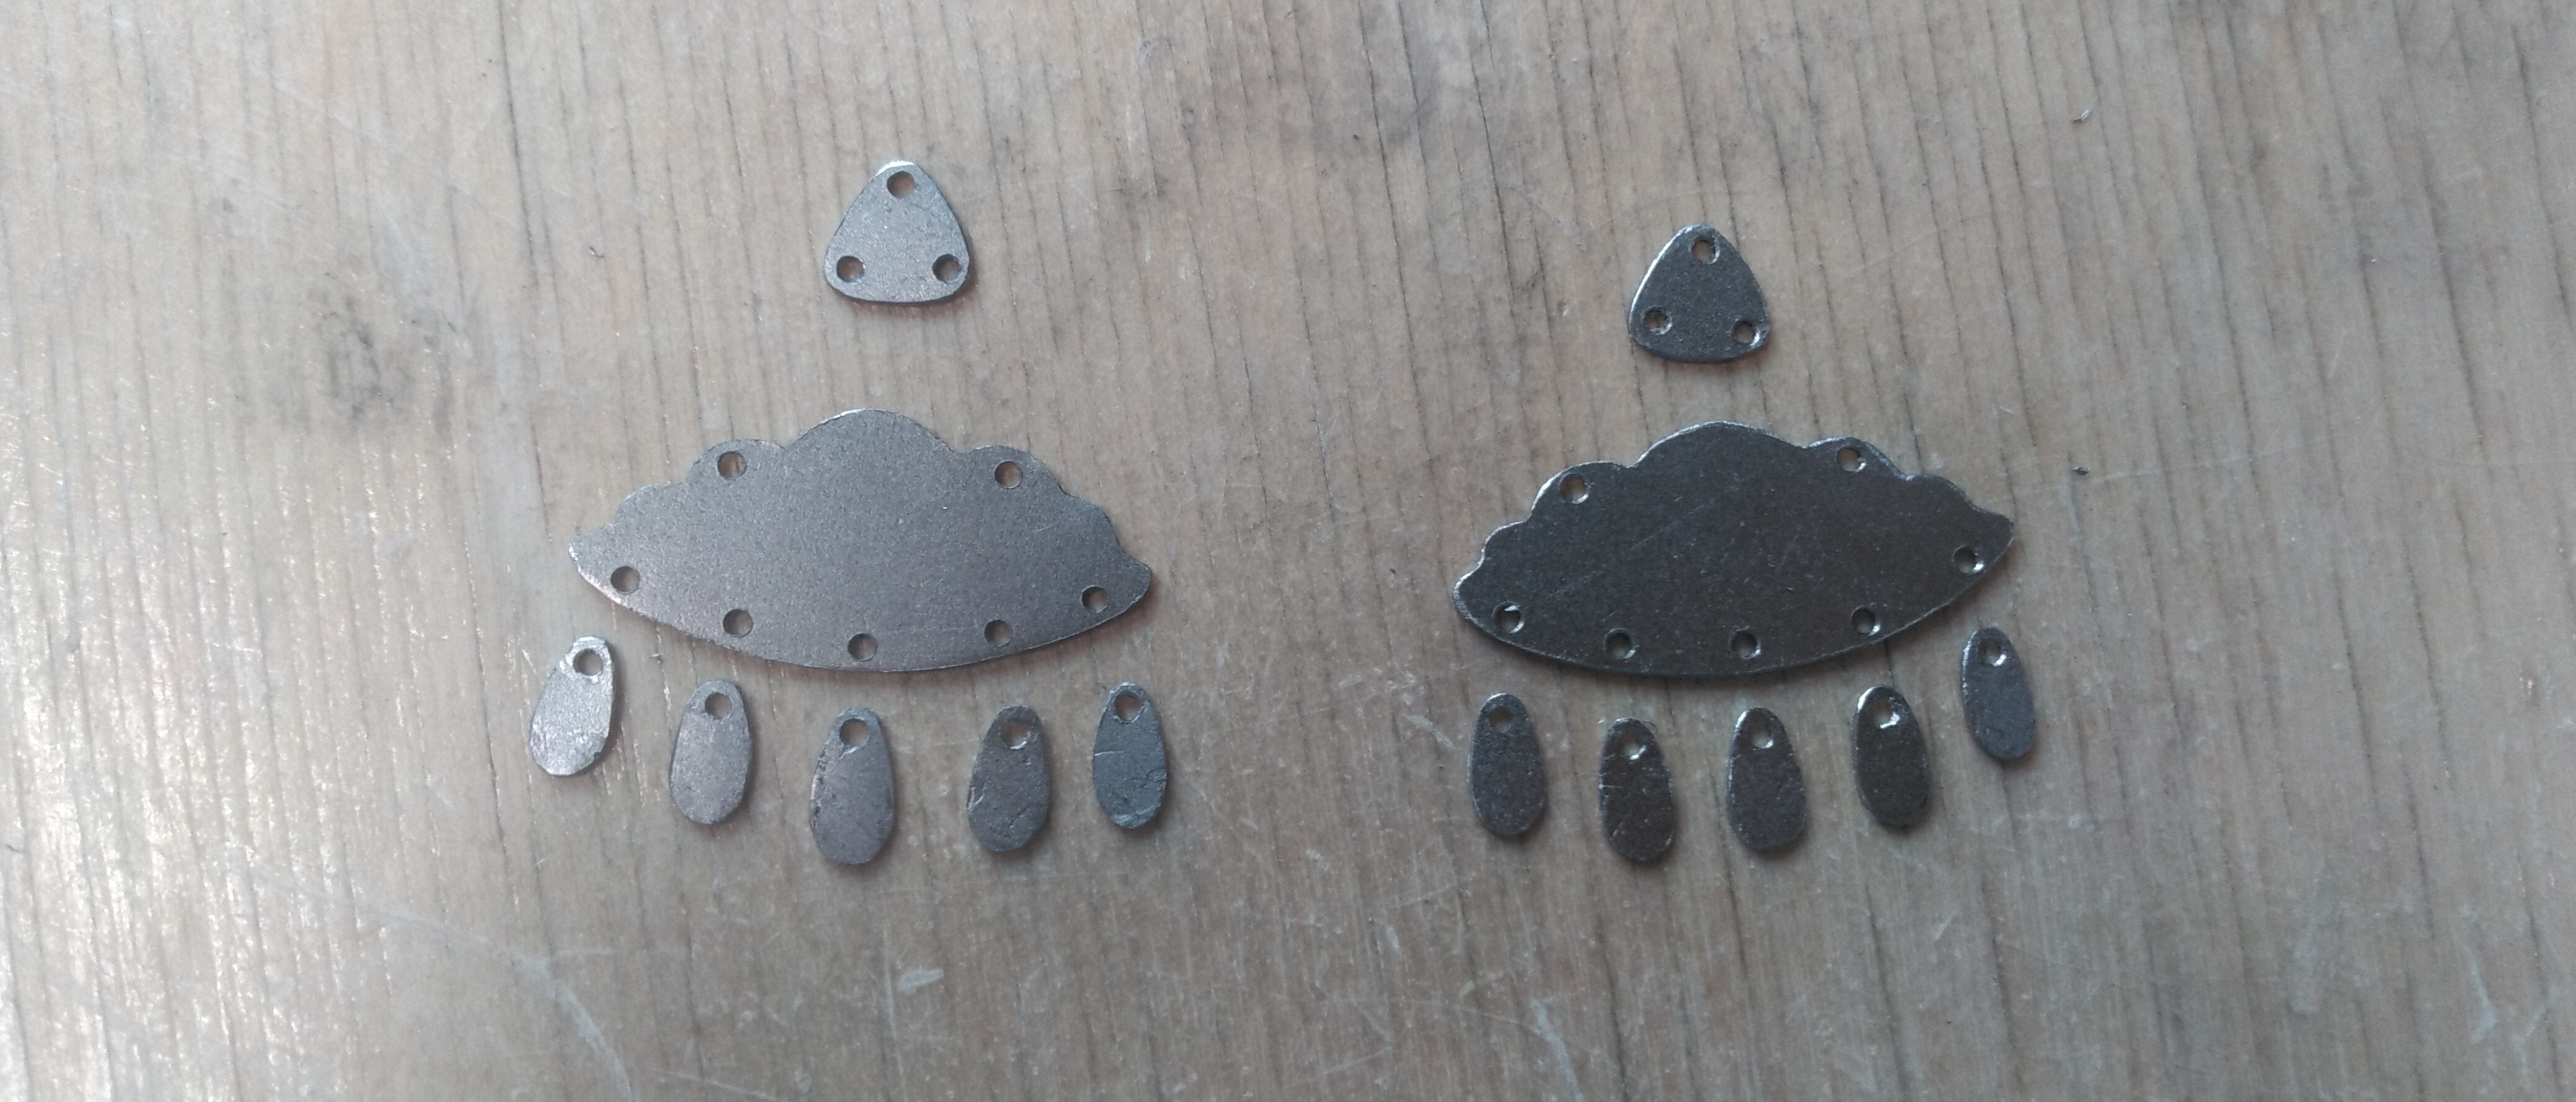 Sheet steel forms in the shape of rain clouds